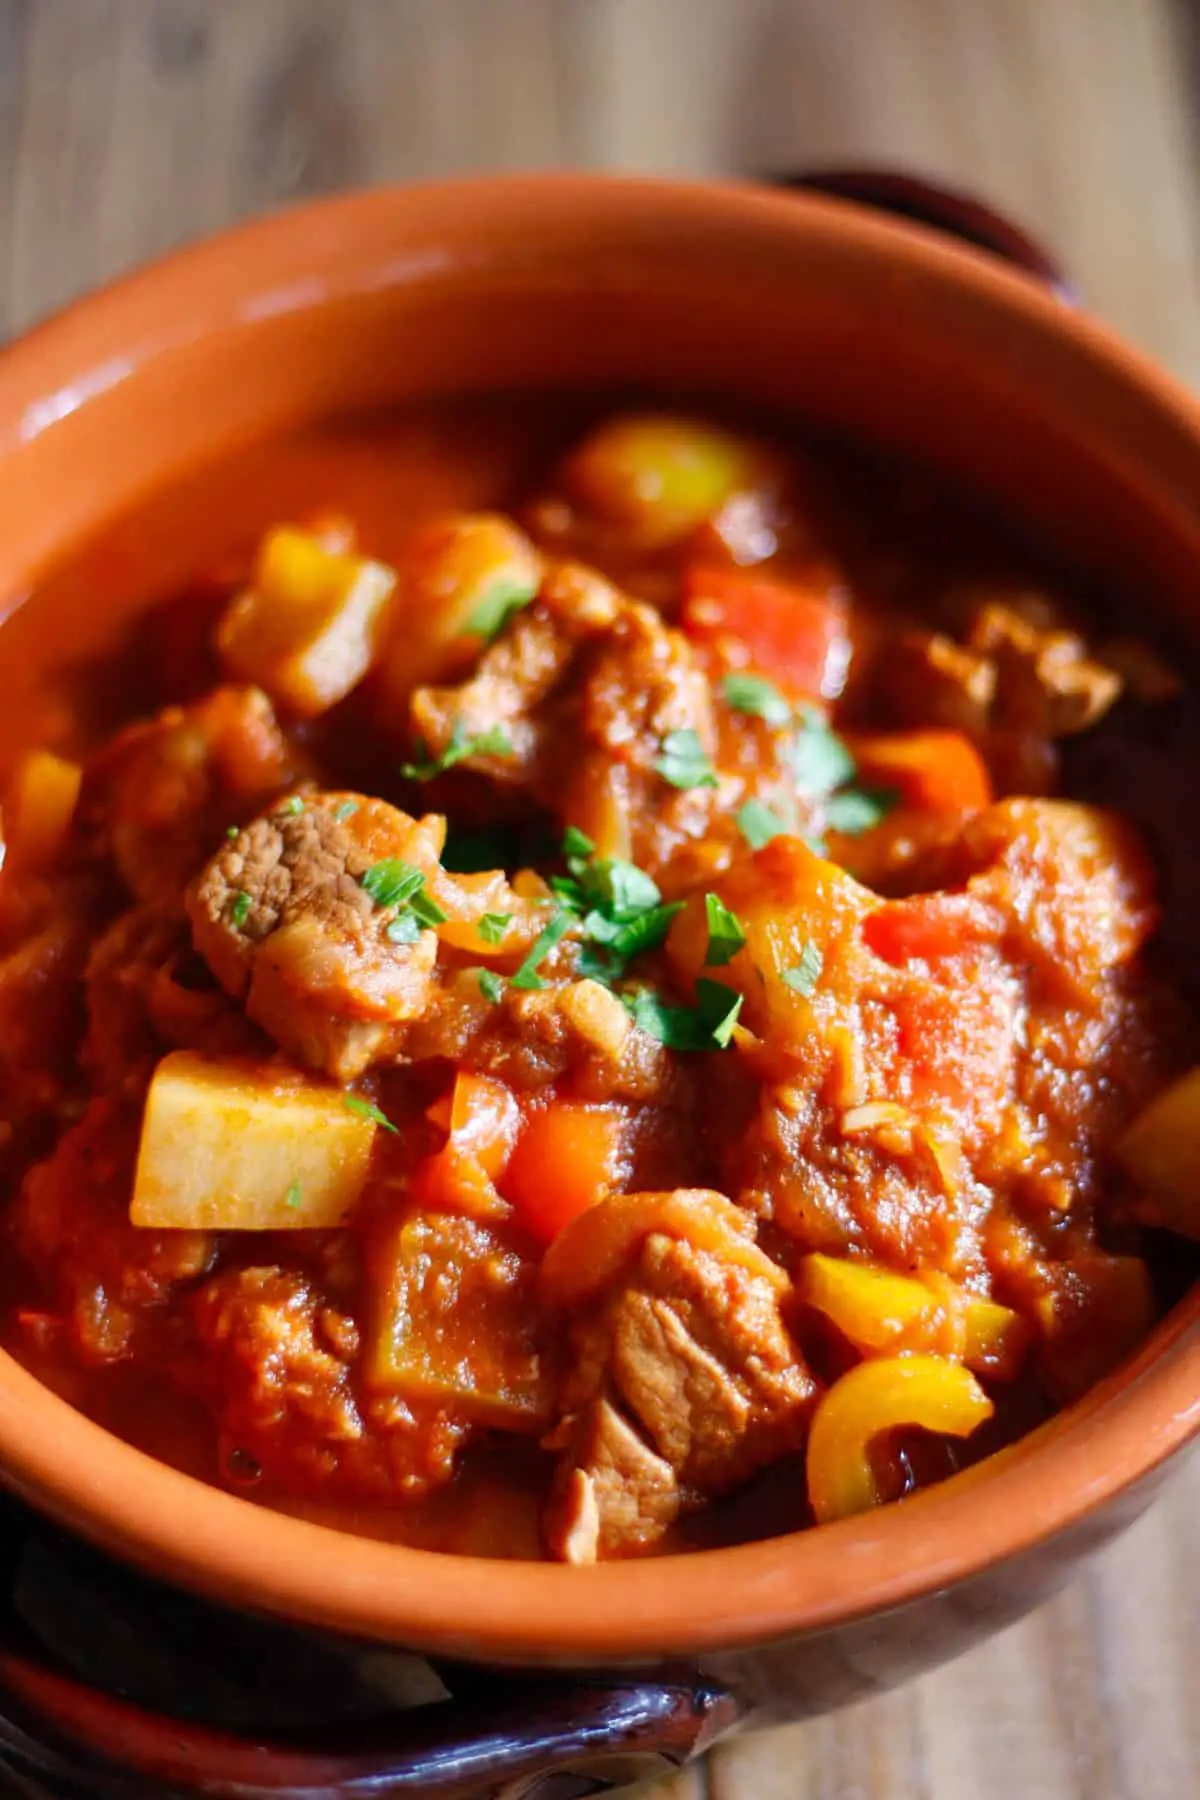 Hungarian Pork Goulash garnished with parsley in a terracotta bowl.